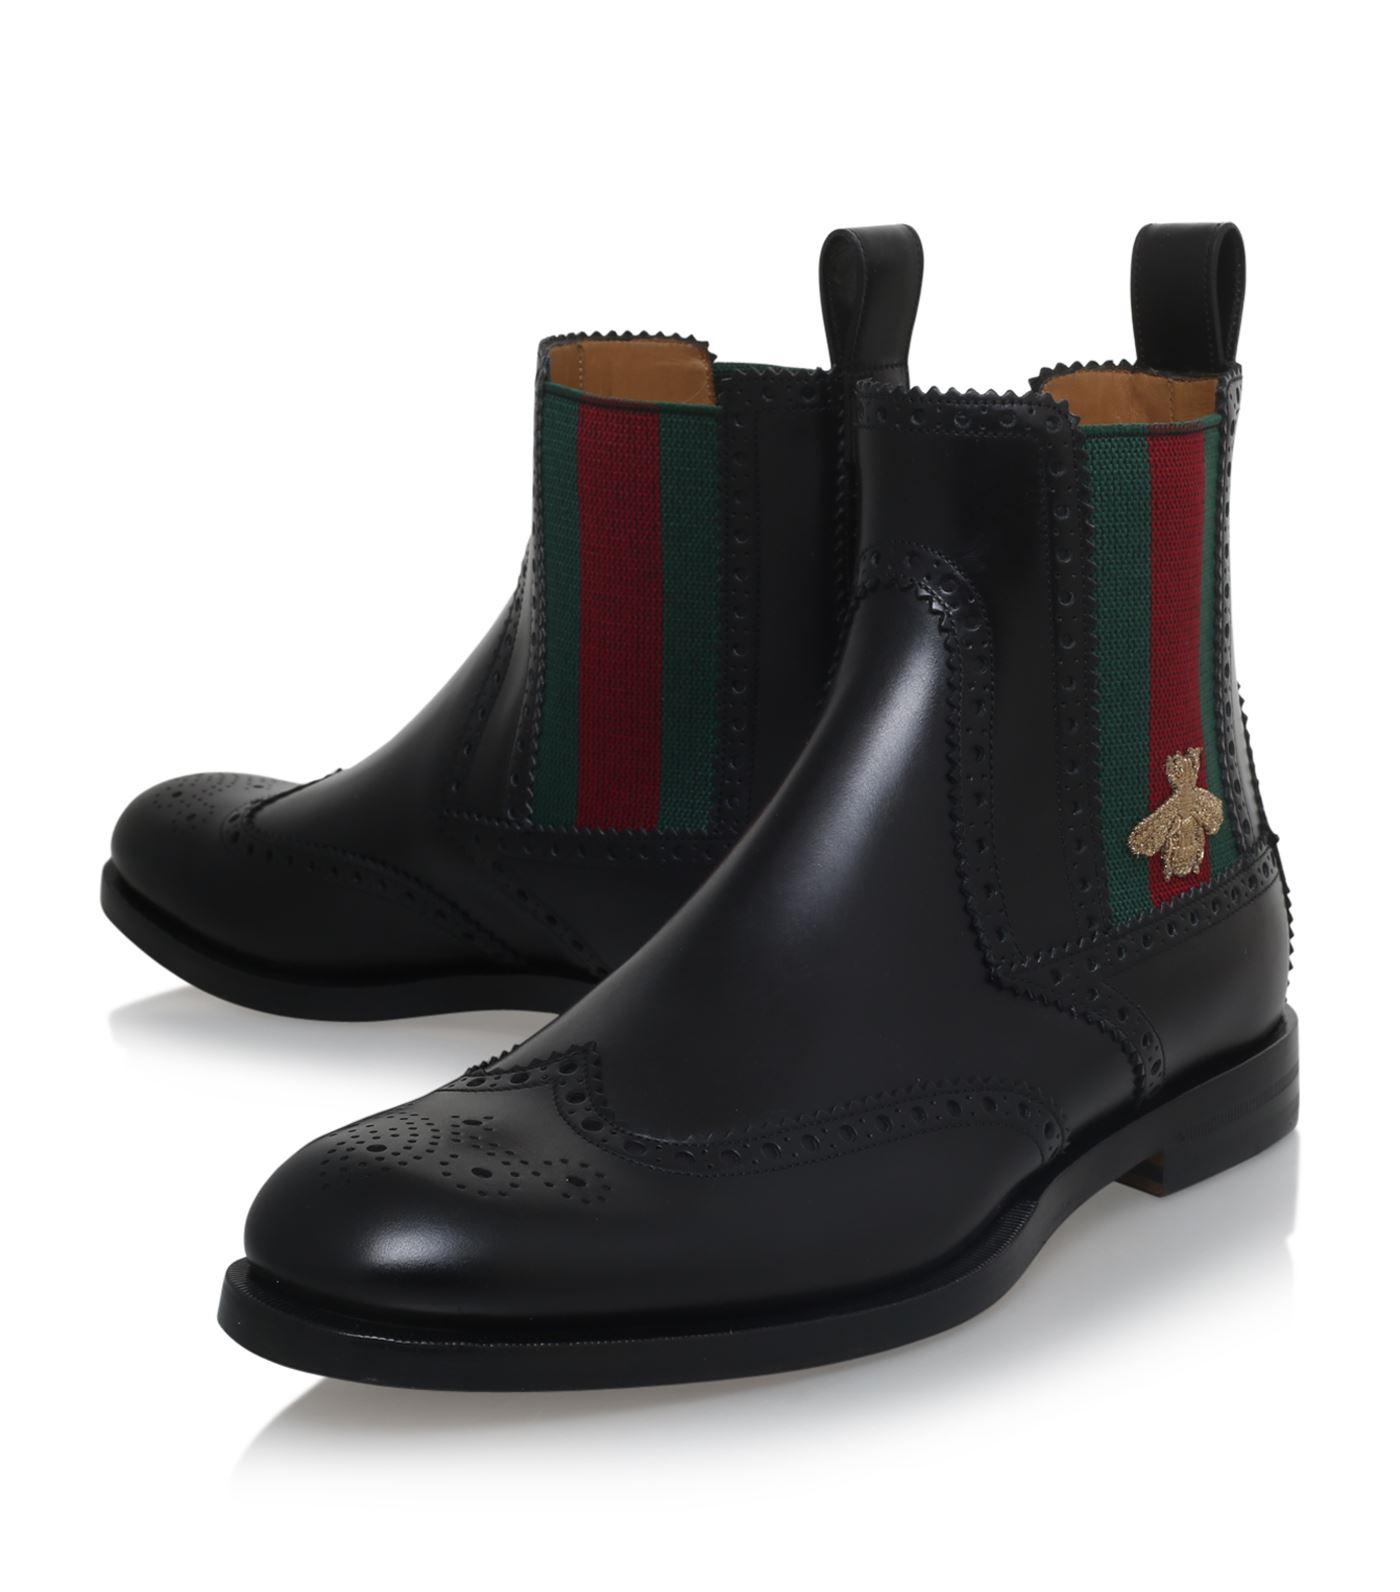 Gucci Strand Chelsea Boots in Black for Men - Lyst